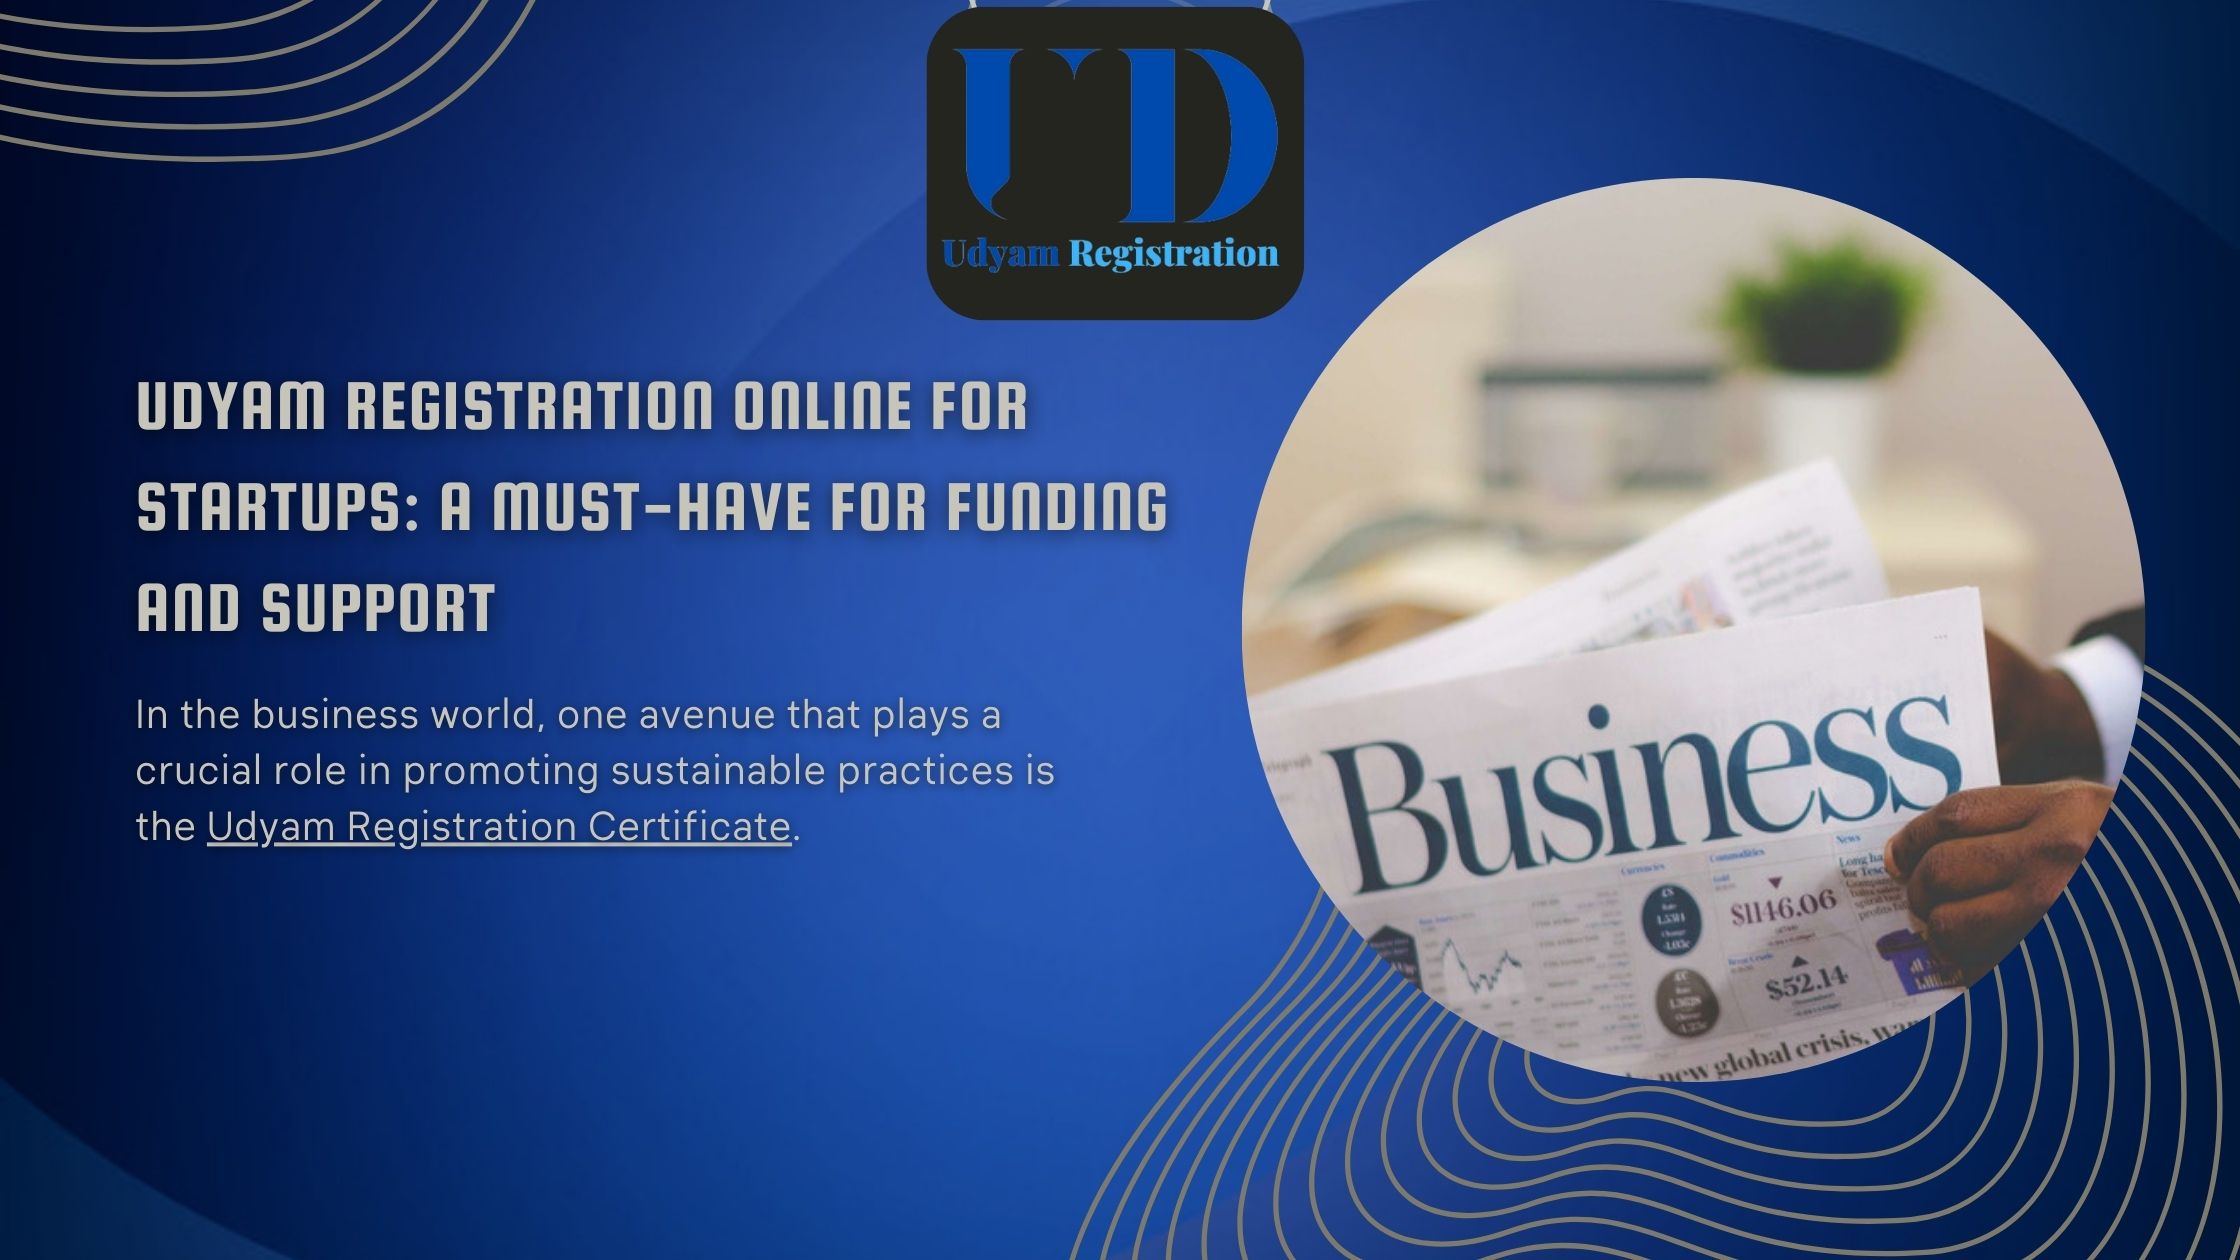 Udyam Registration Online for Startups: A Must-Have for Funding and Support